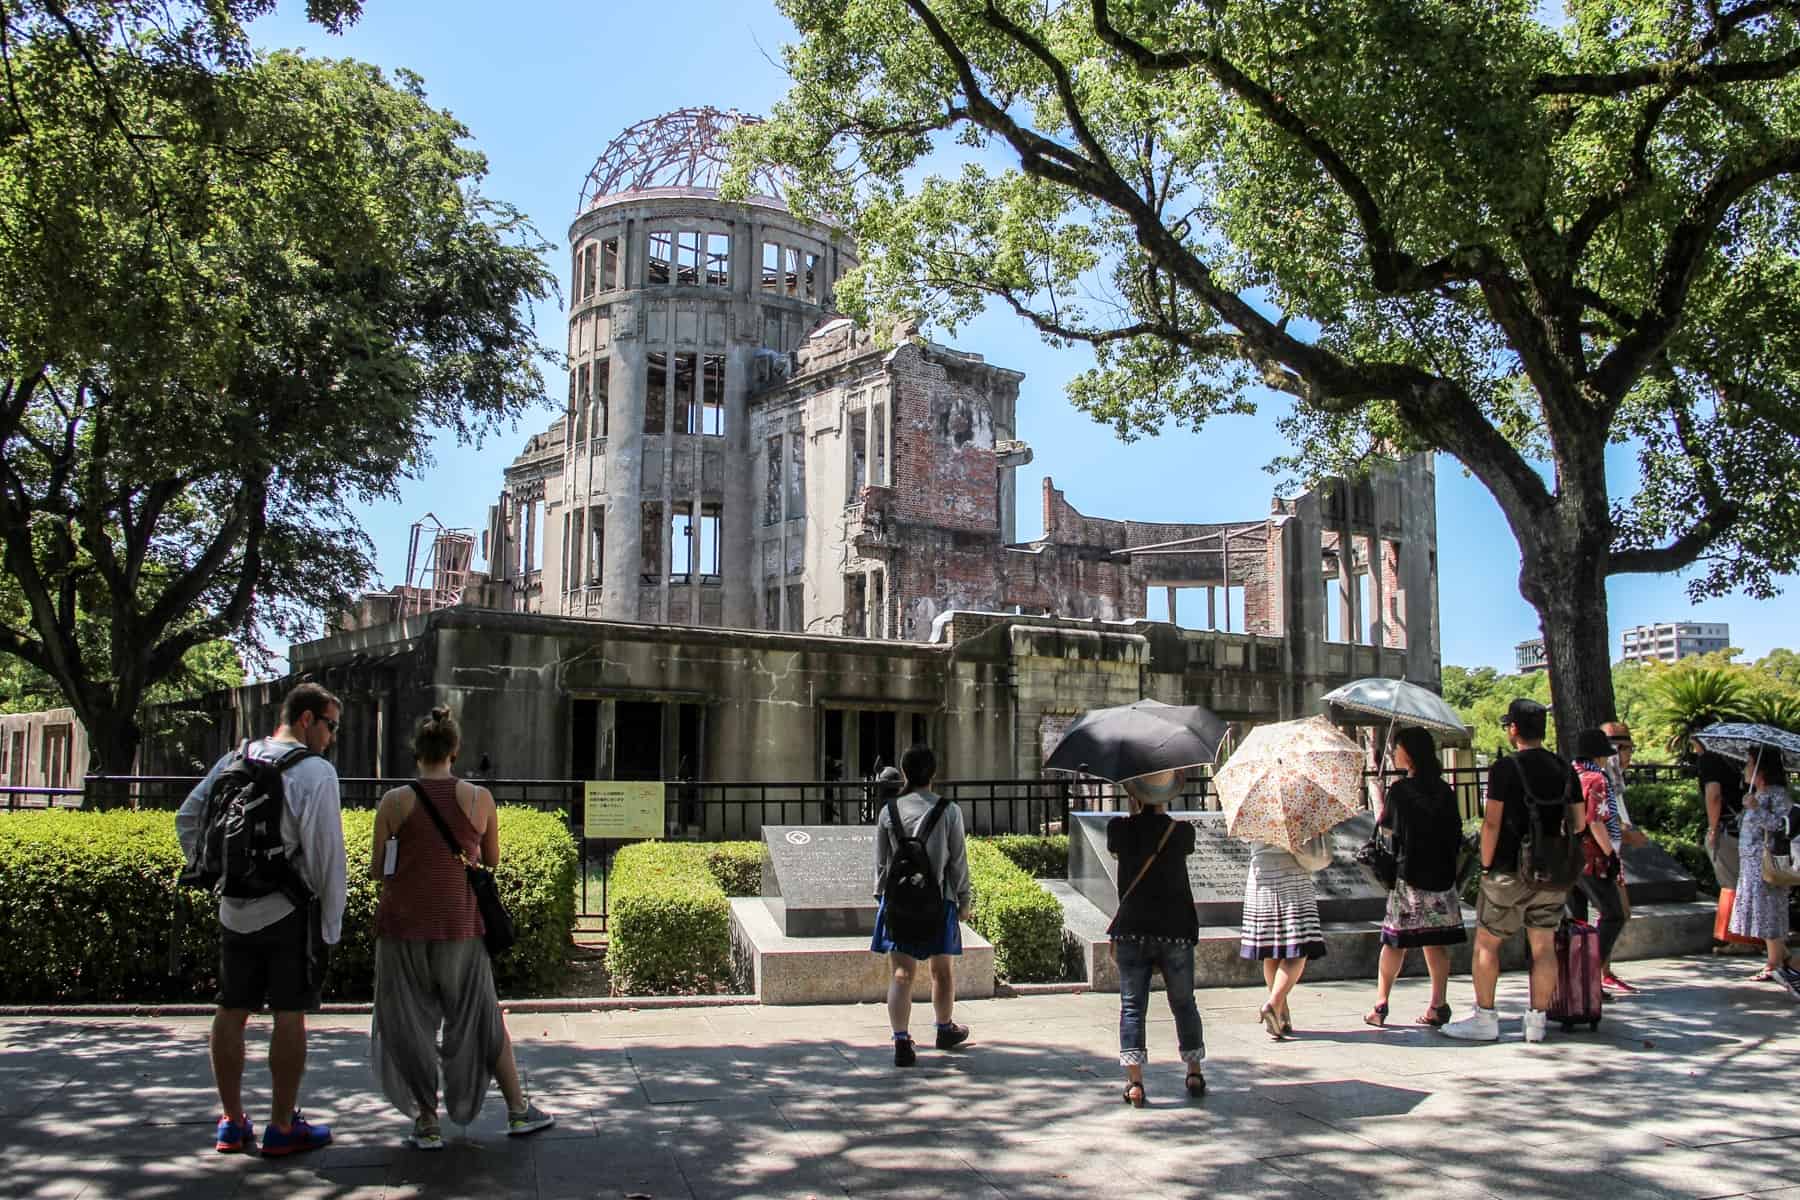 Tourists visiting the A-Bomb Dome in Hiroshima Peace Park Memorial - a hollow shell of a building charred by the Atomic bomb dropped on the city. 